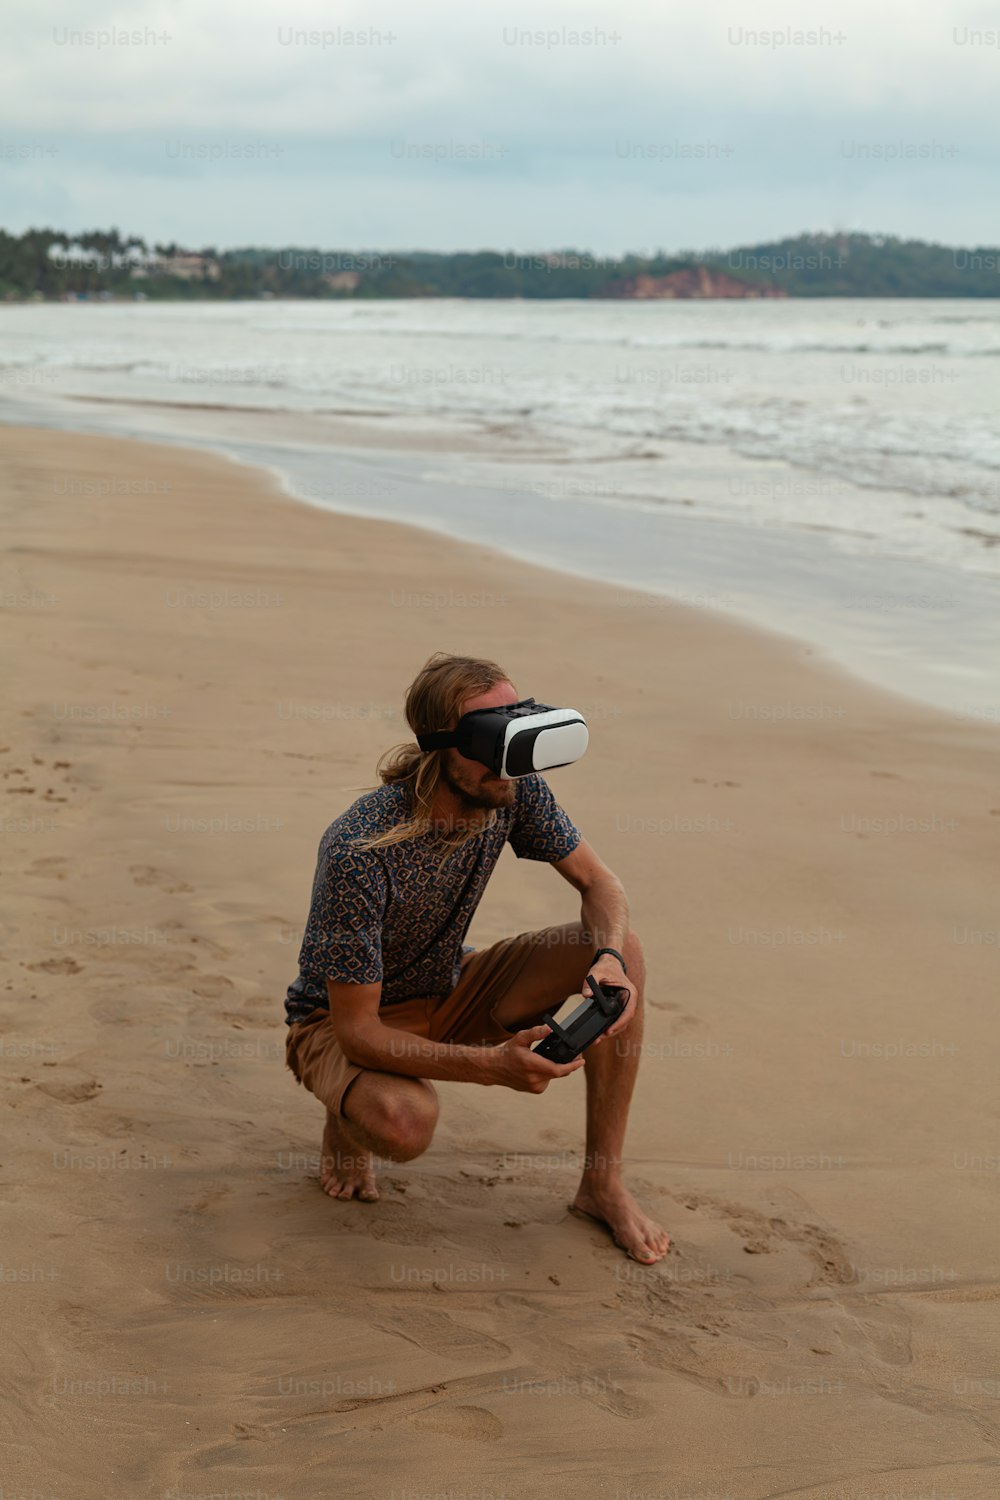 a man kneeling down on a beach holding a camera